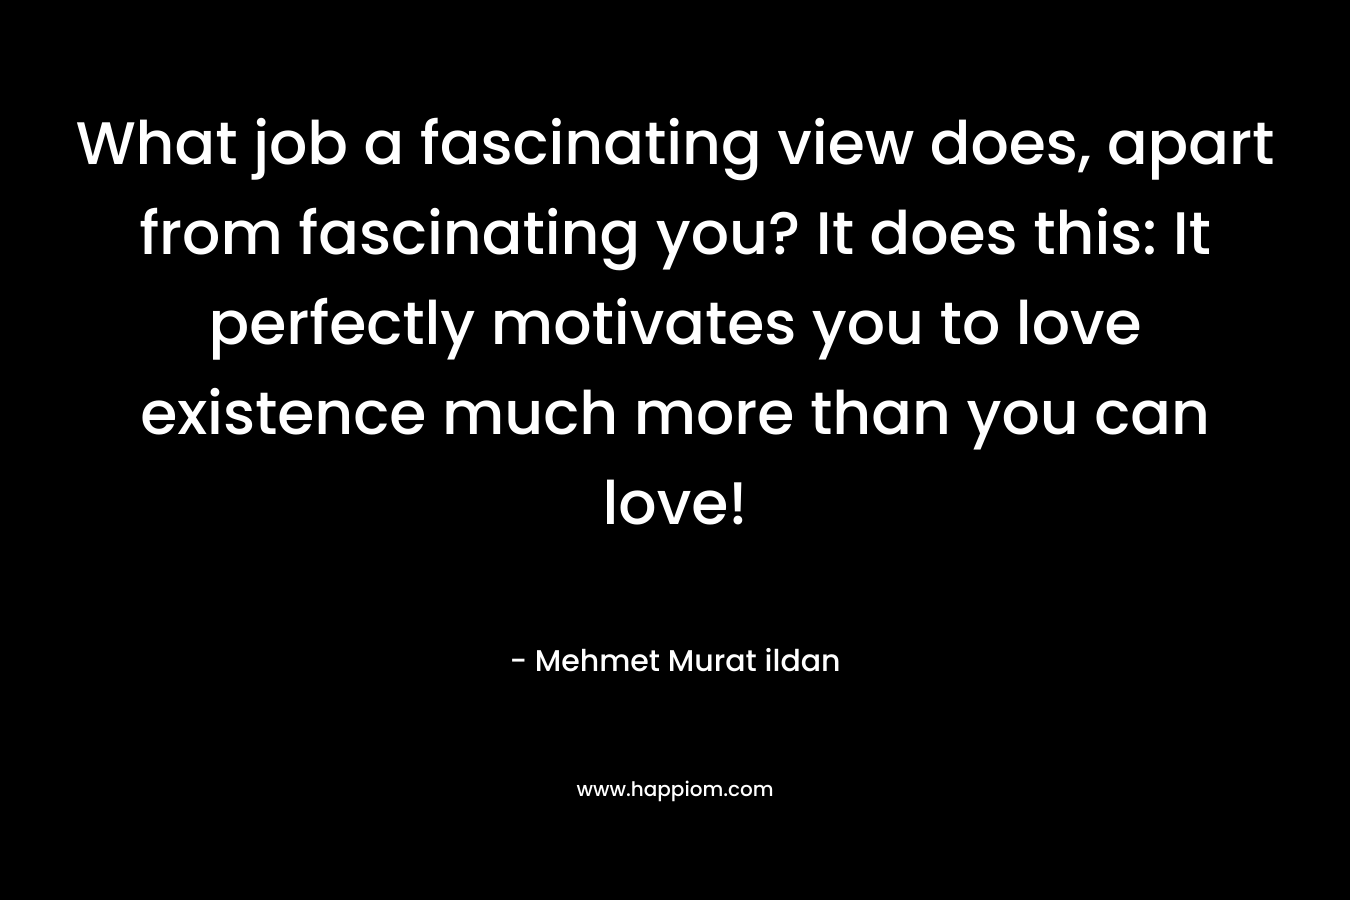 What job a fascinating view does, apart from fascinating you? It does this: It perfectly motivates you to love existence much more than you can love! – Mehmet Murat ildan